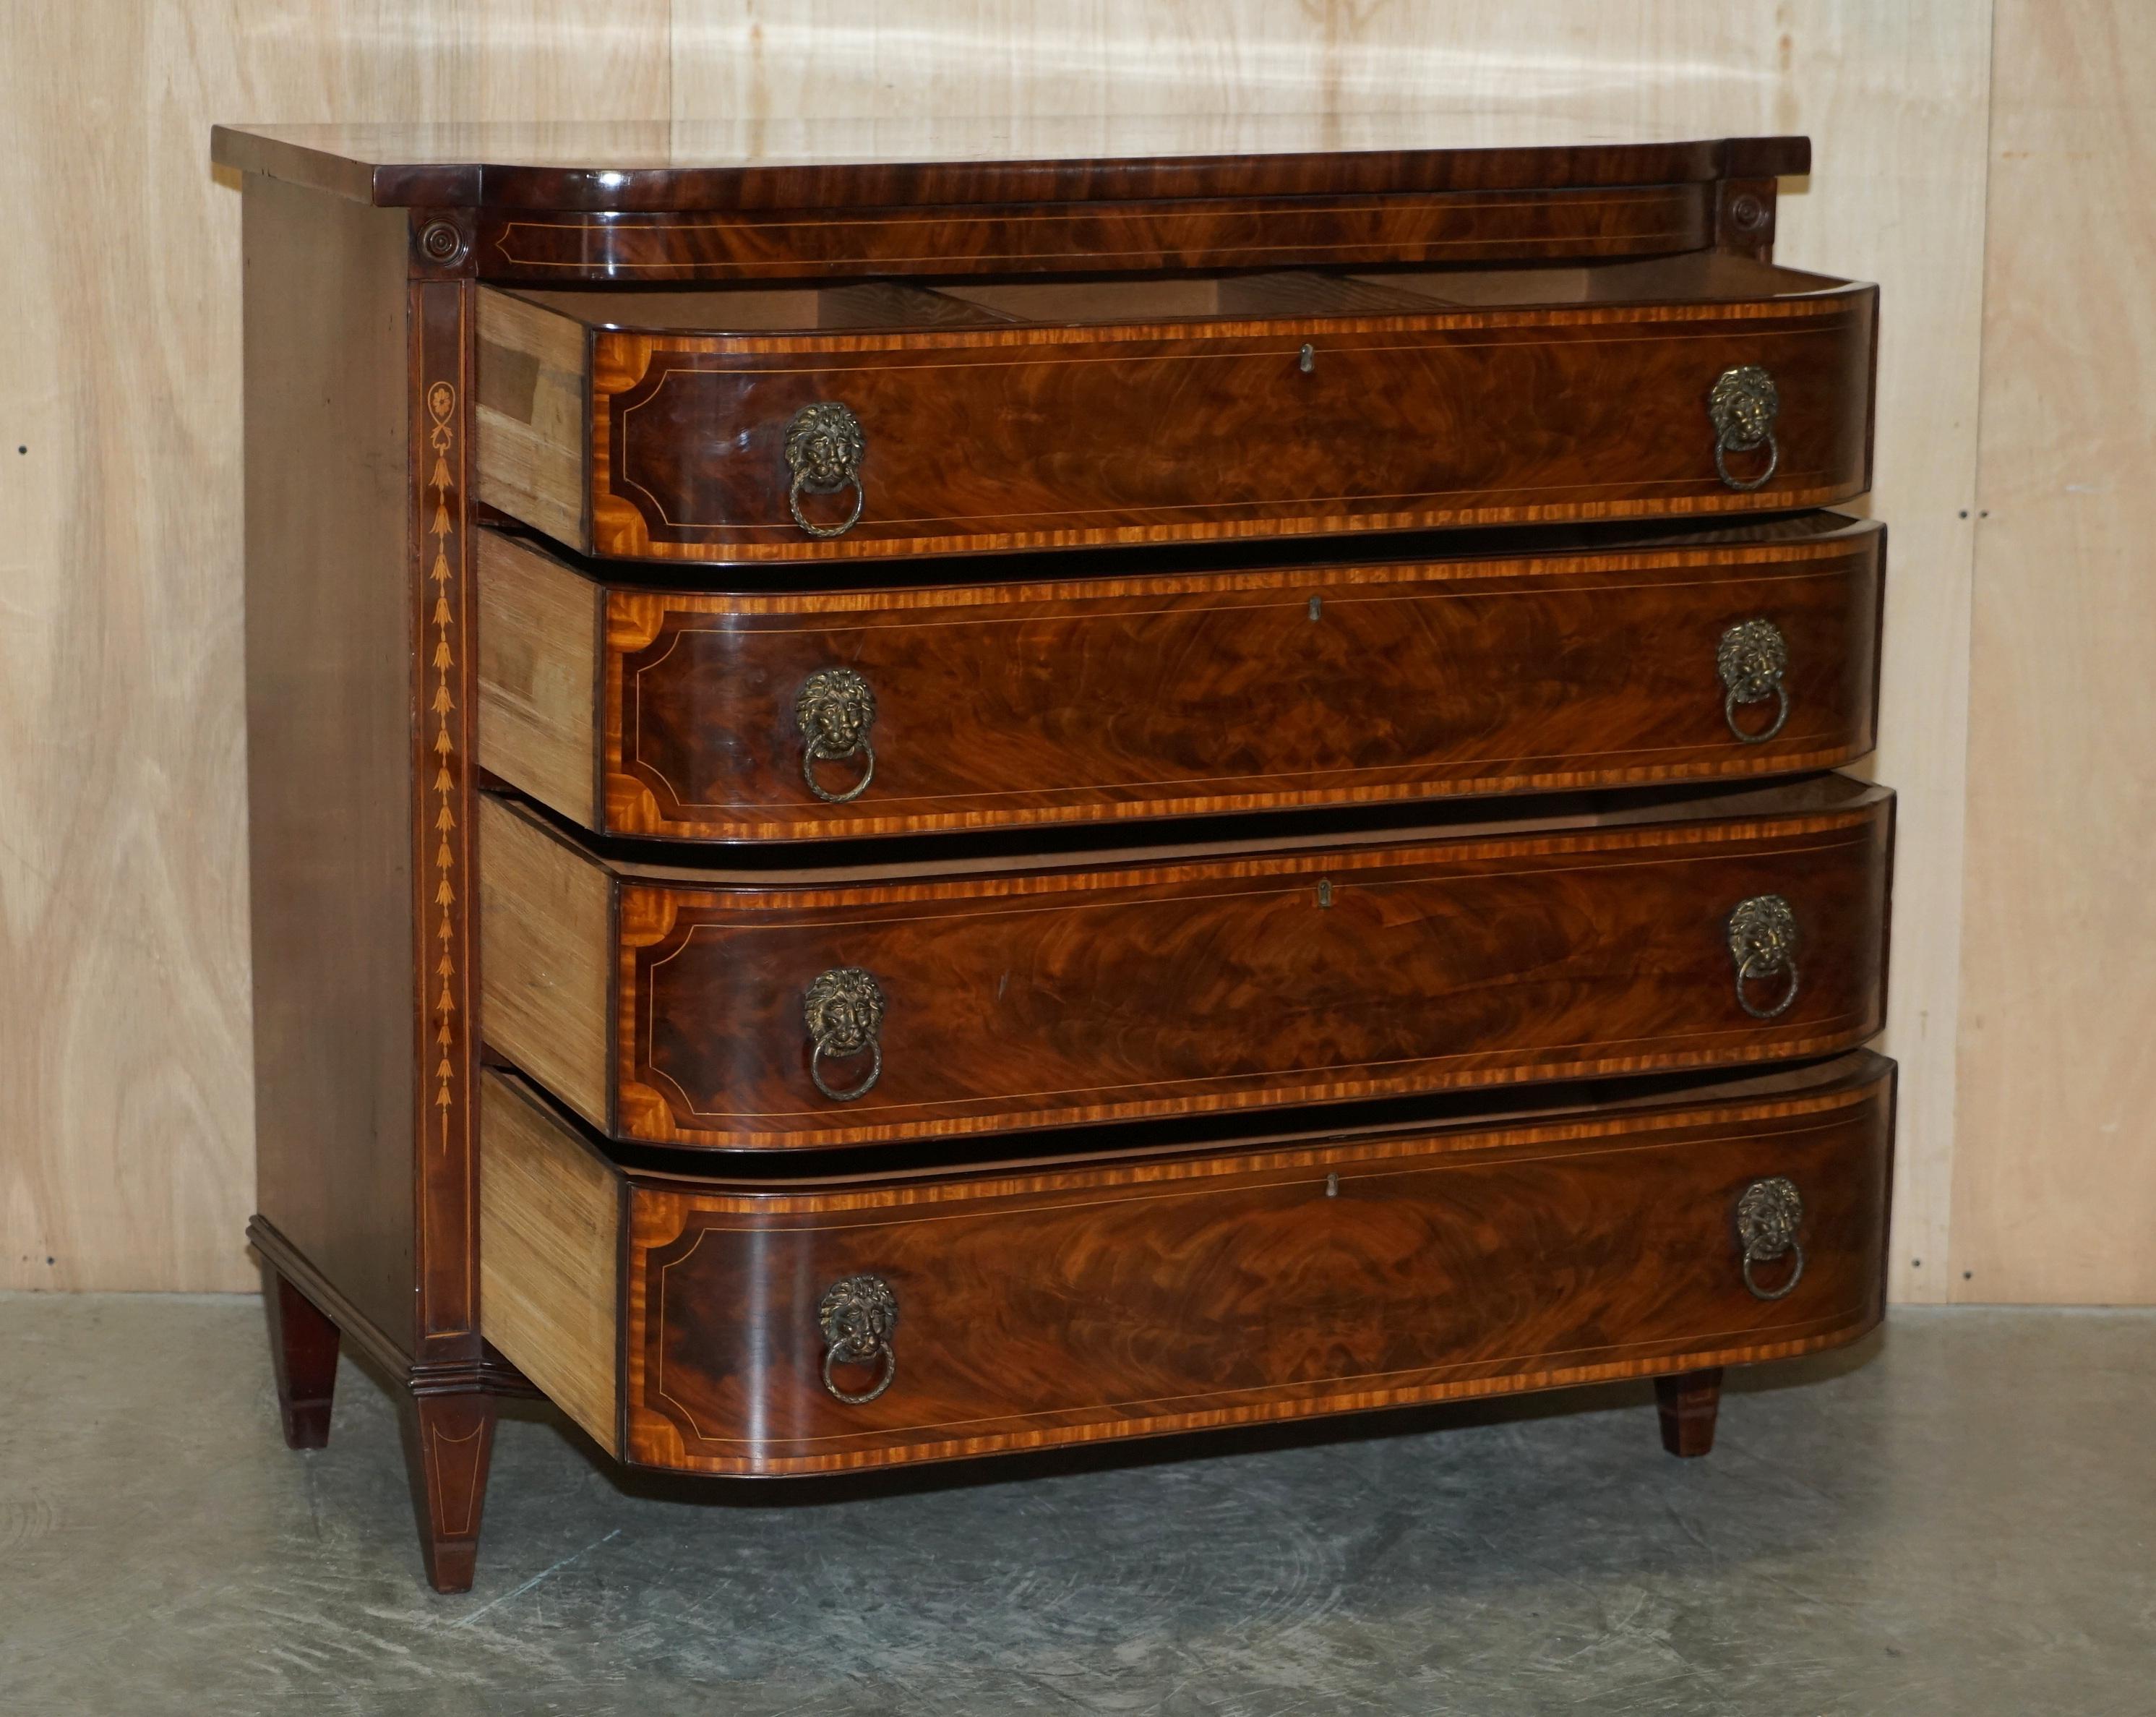 SHERATON 1859 DATED FLAMED HARDWOOD LION HEAD HANDLE CHEST OF DRAWERs im Angebot 9